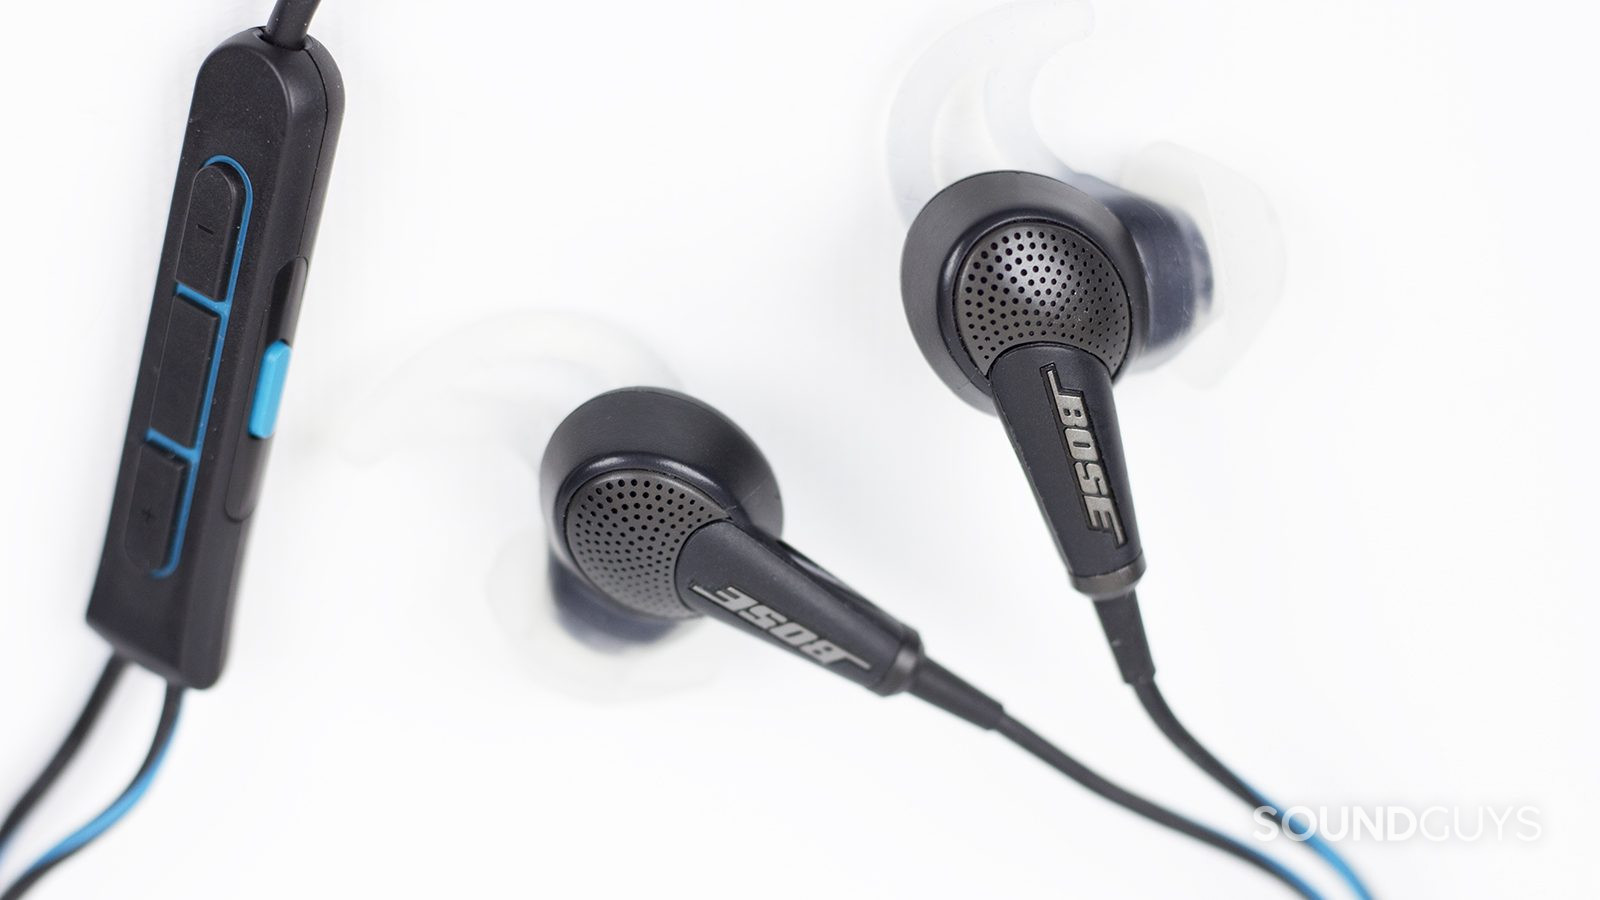 The Bose QuietComfort 20 noise canceling earbuds and mic module on white background.